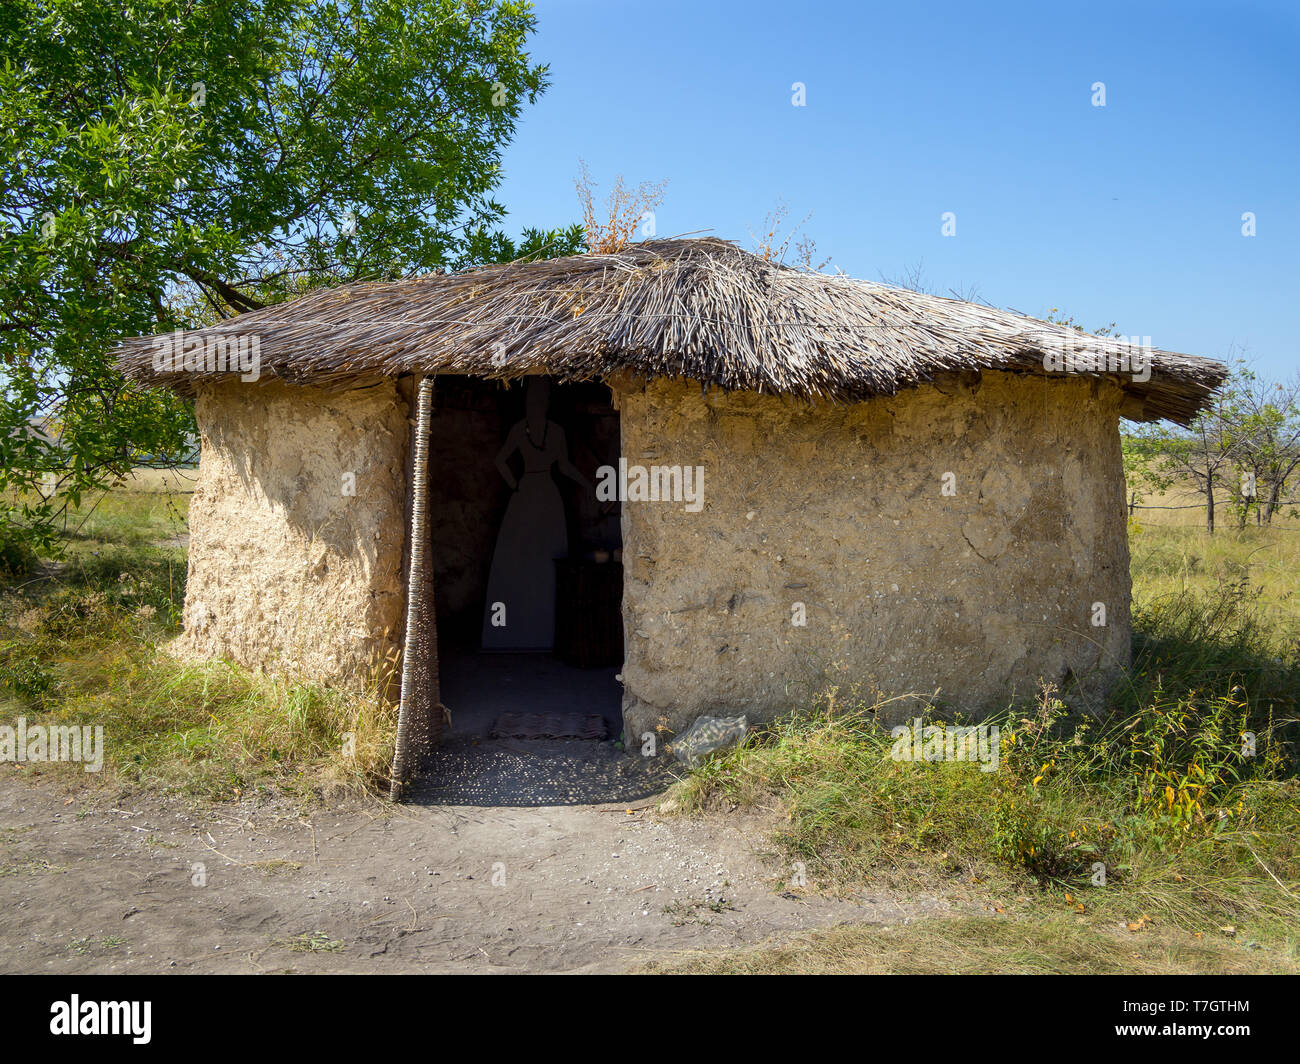 Mud hut with a reed roof, archaeological park 'From nomadic to cities', Divnogorye, Voronezh region Stock Photo